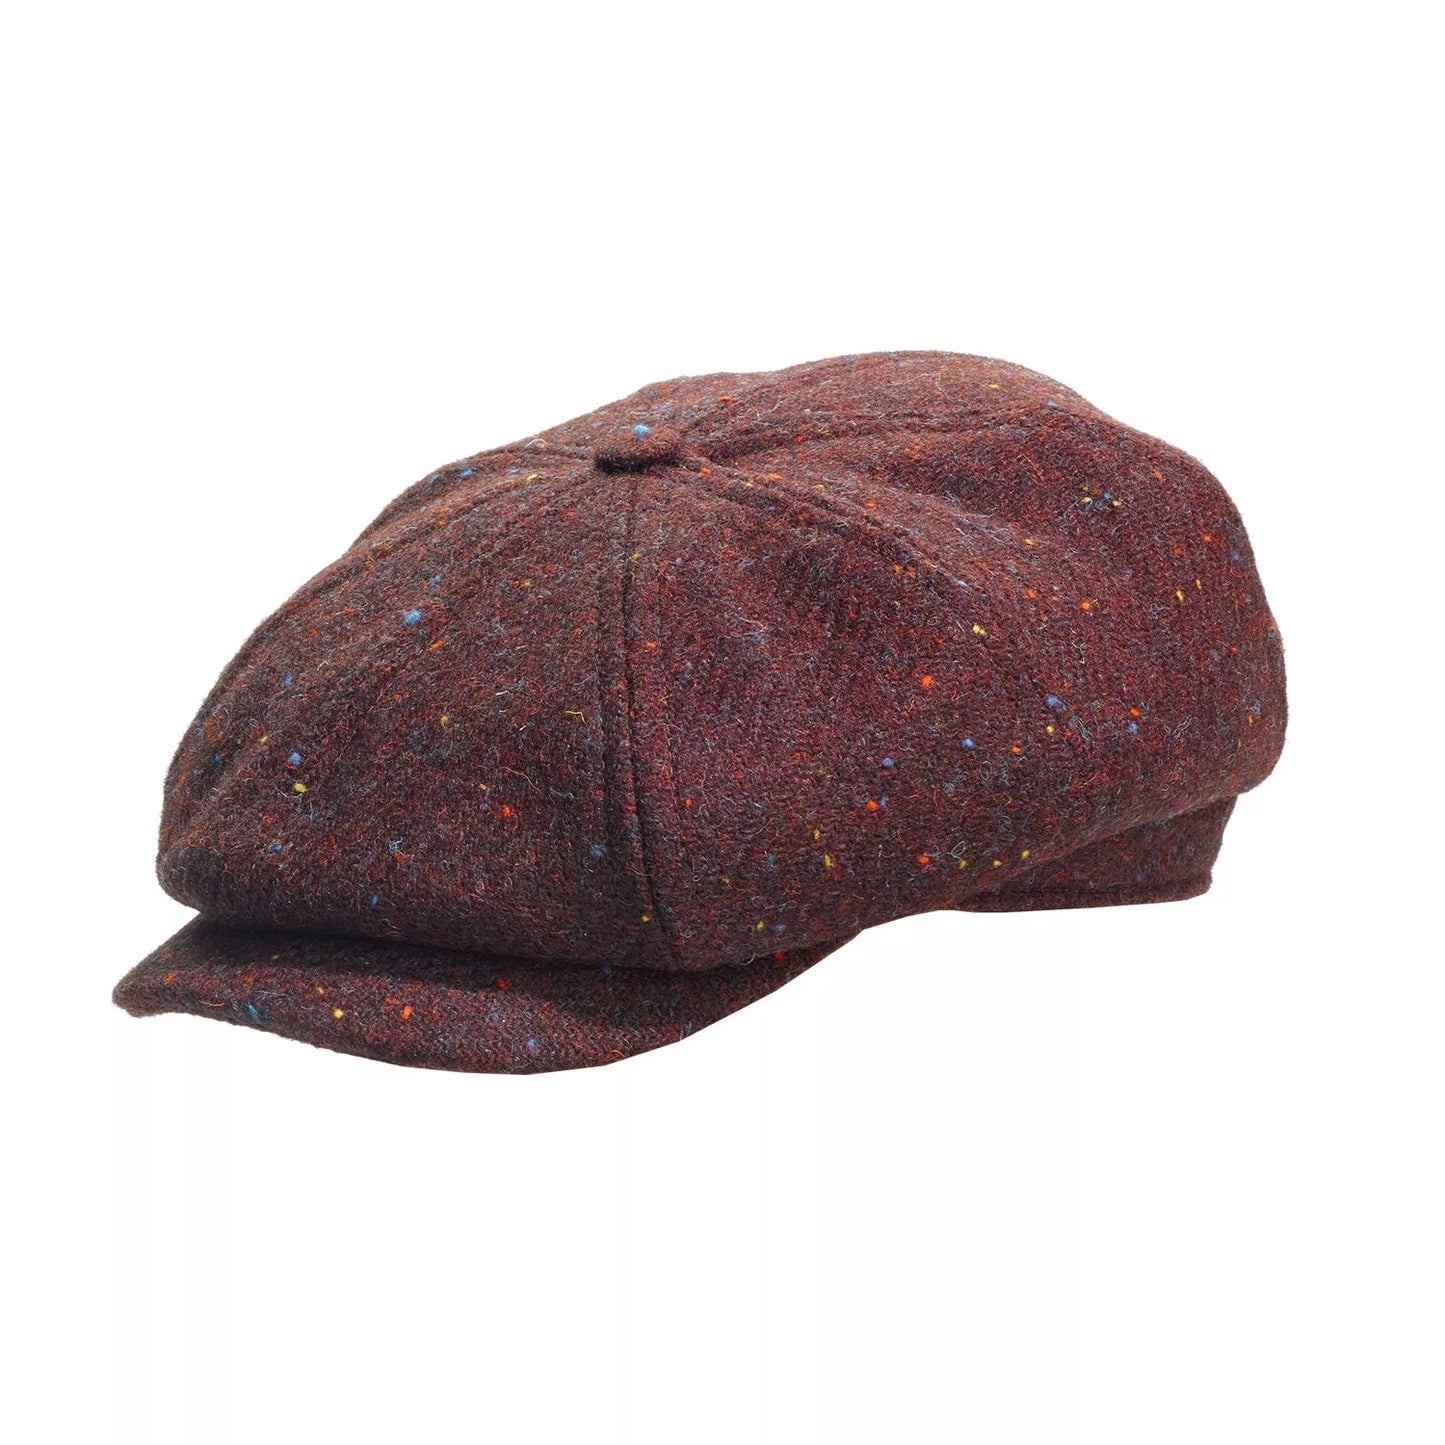 Timeless Style With The Speckled Harris Tweed Brooklyn Newsboy Cap By ...